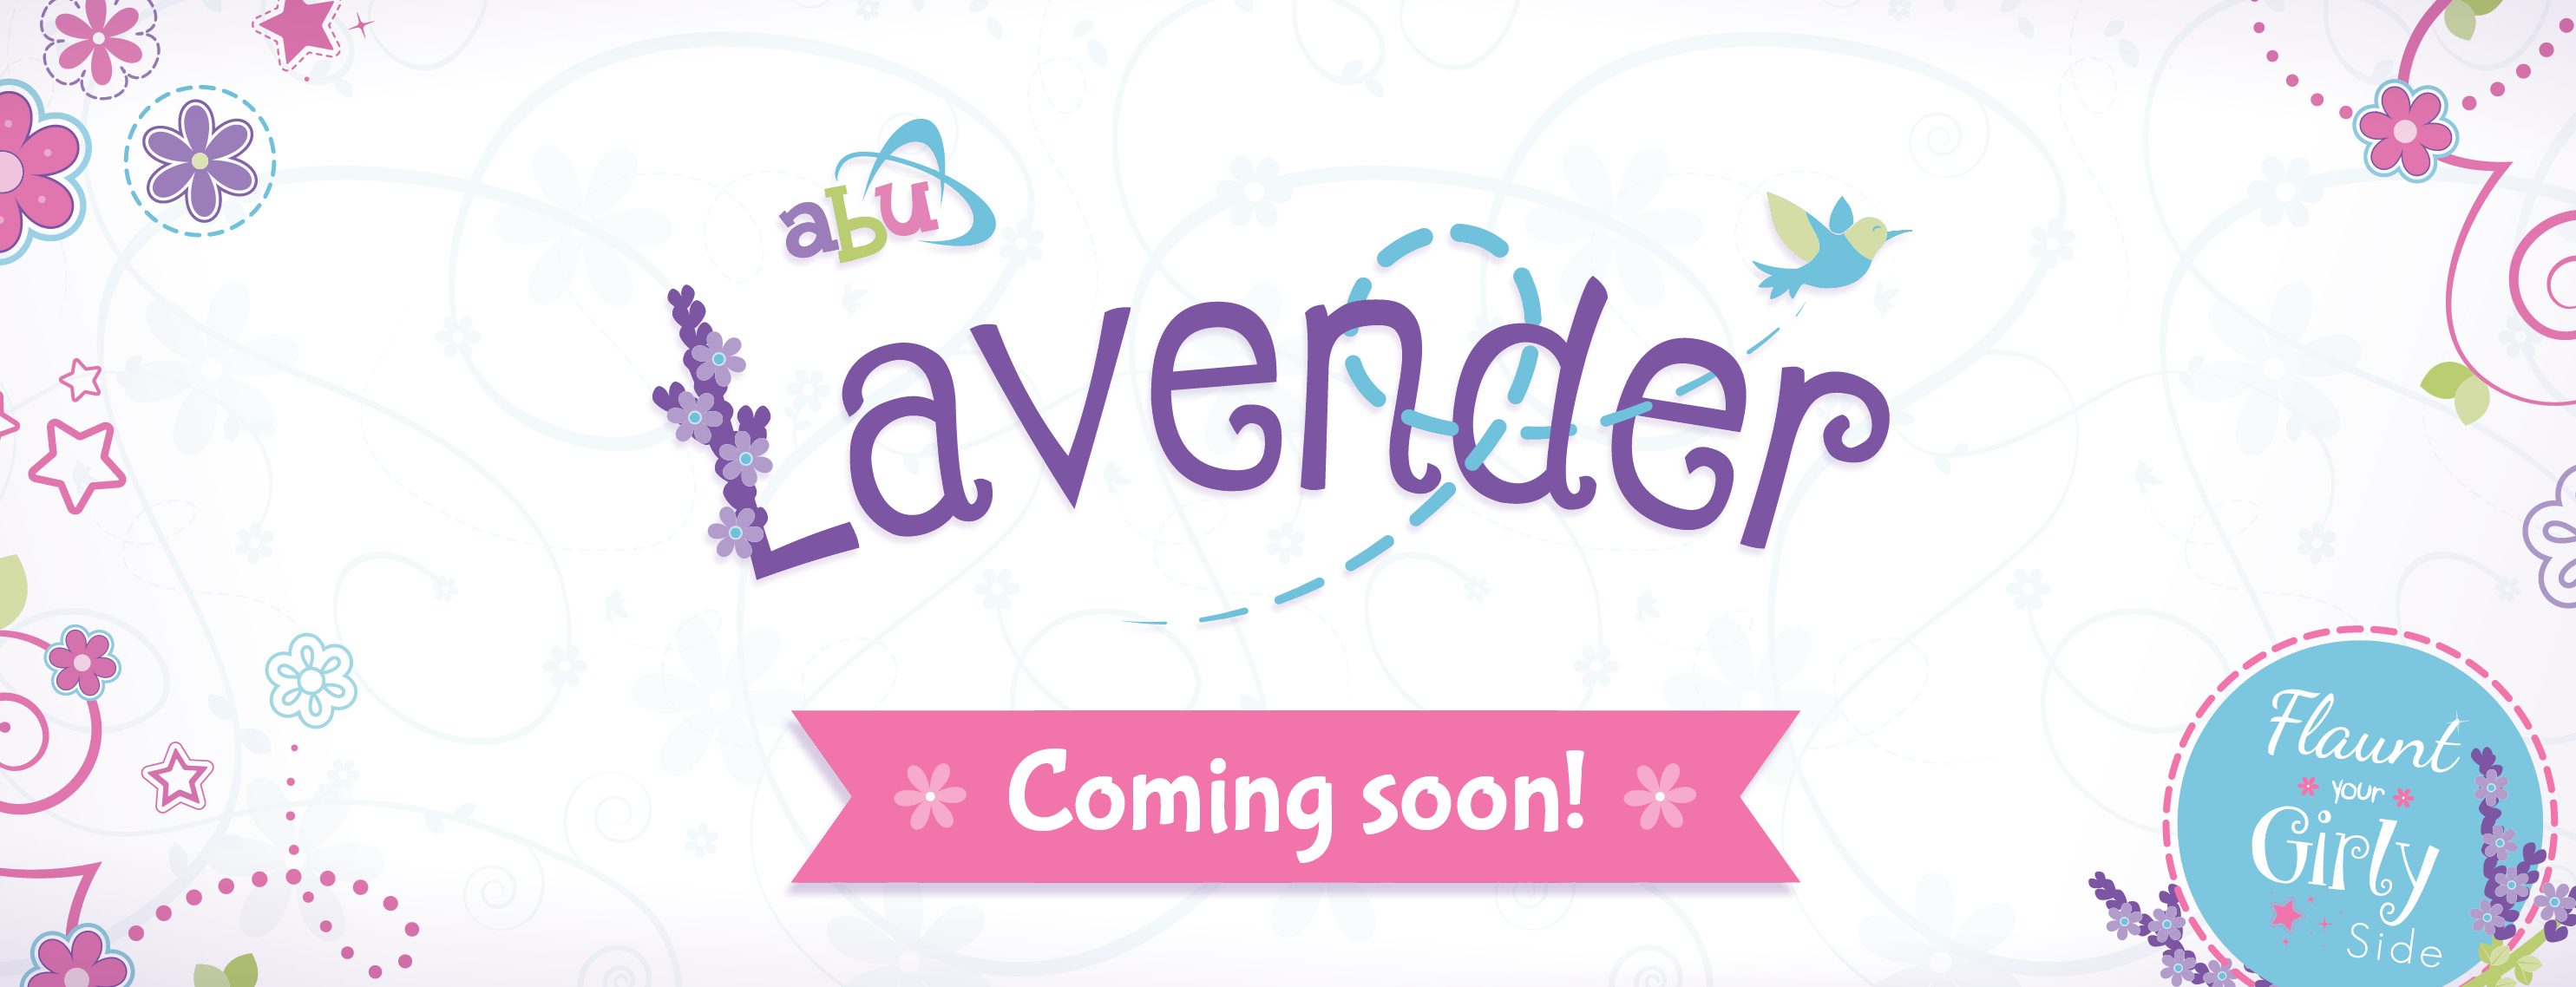 Lavender_Banner_Coming_Soon